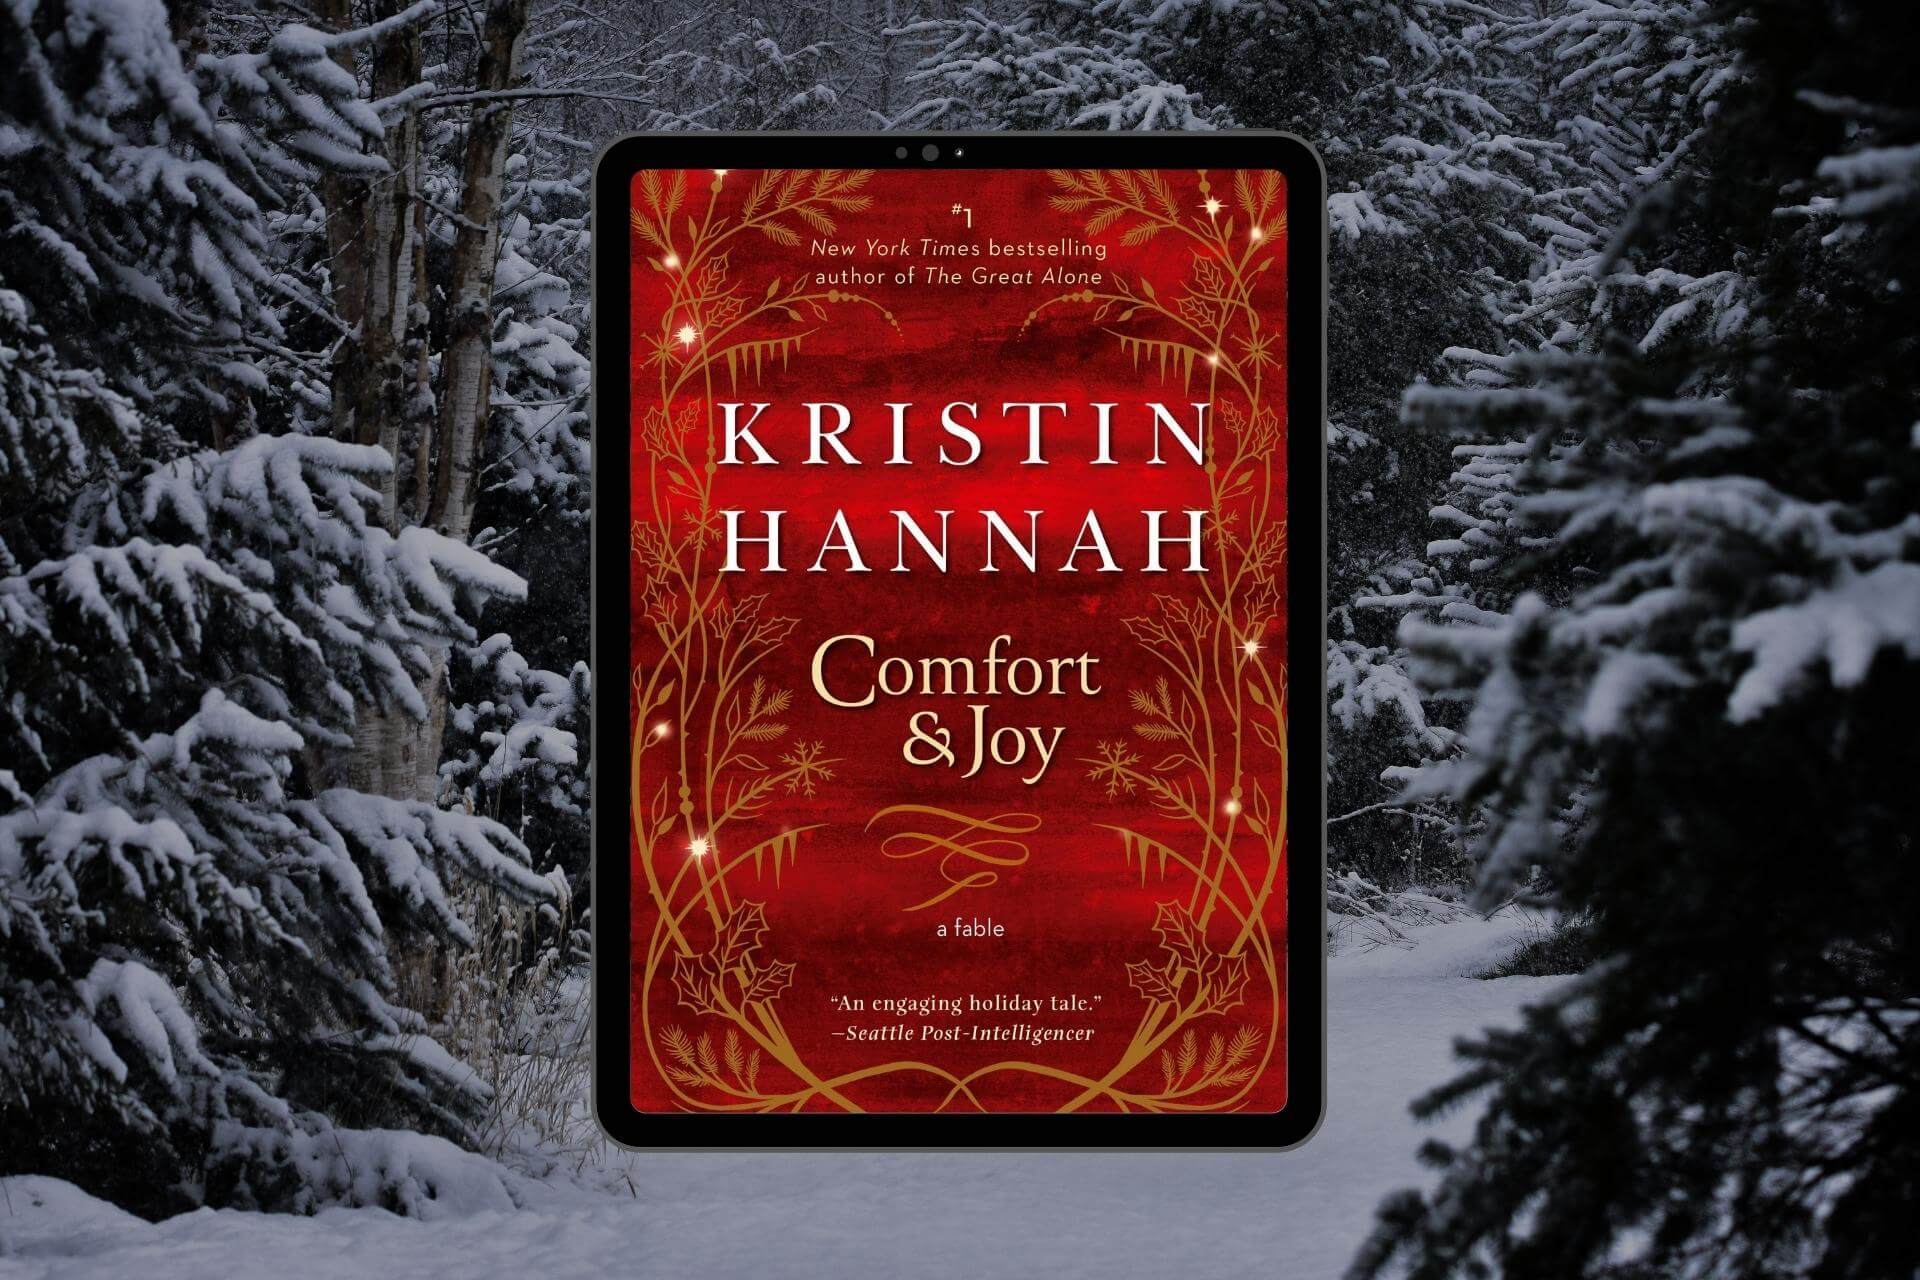 Book Club Questions for Comfort & Joy by Kristin Hannah